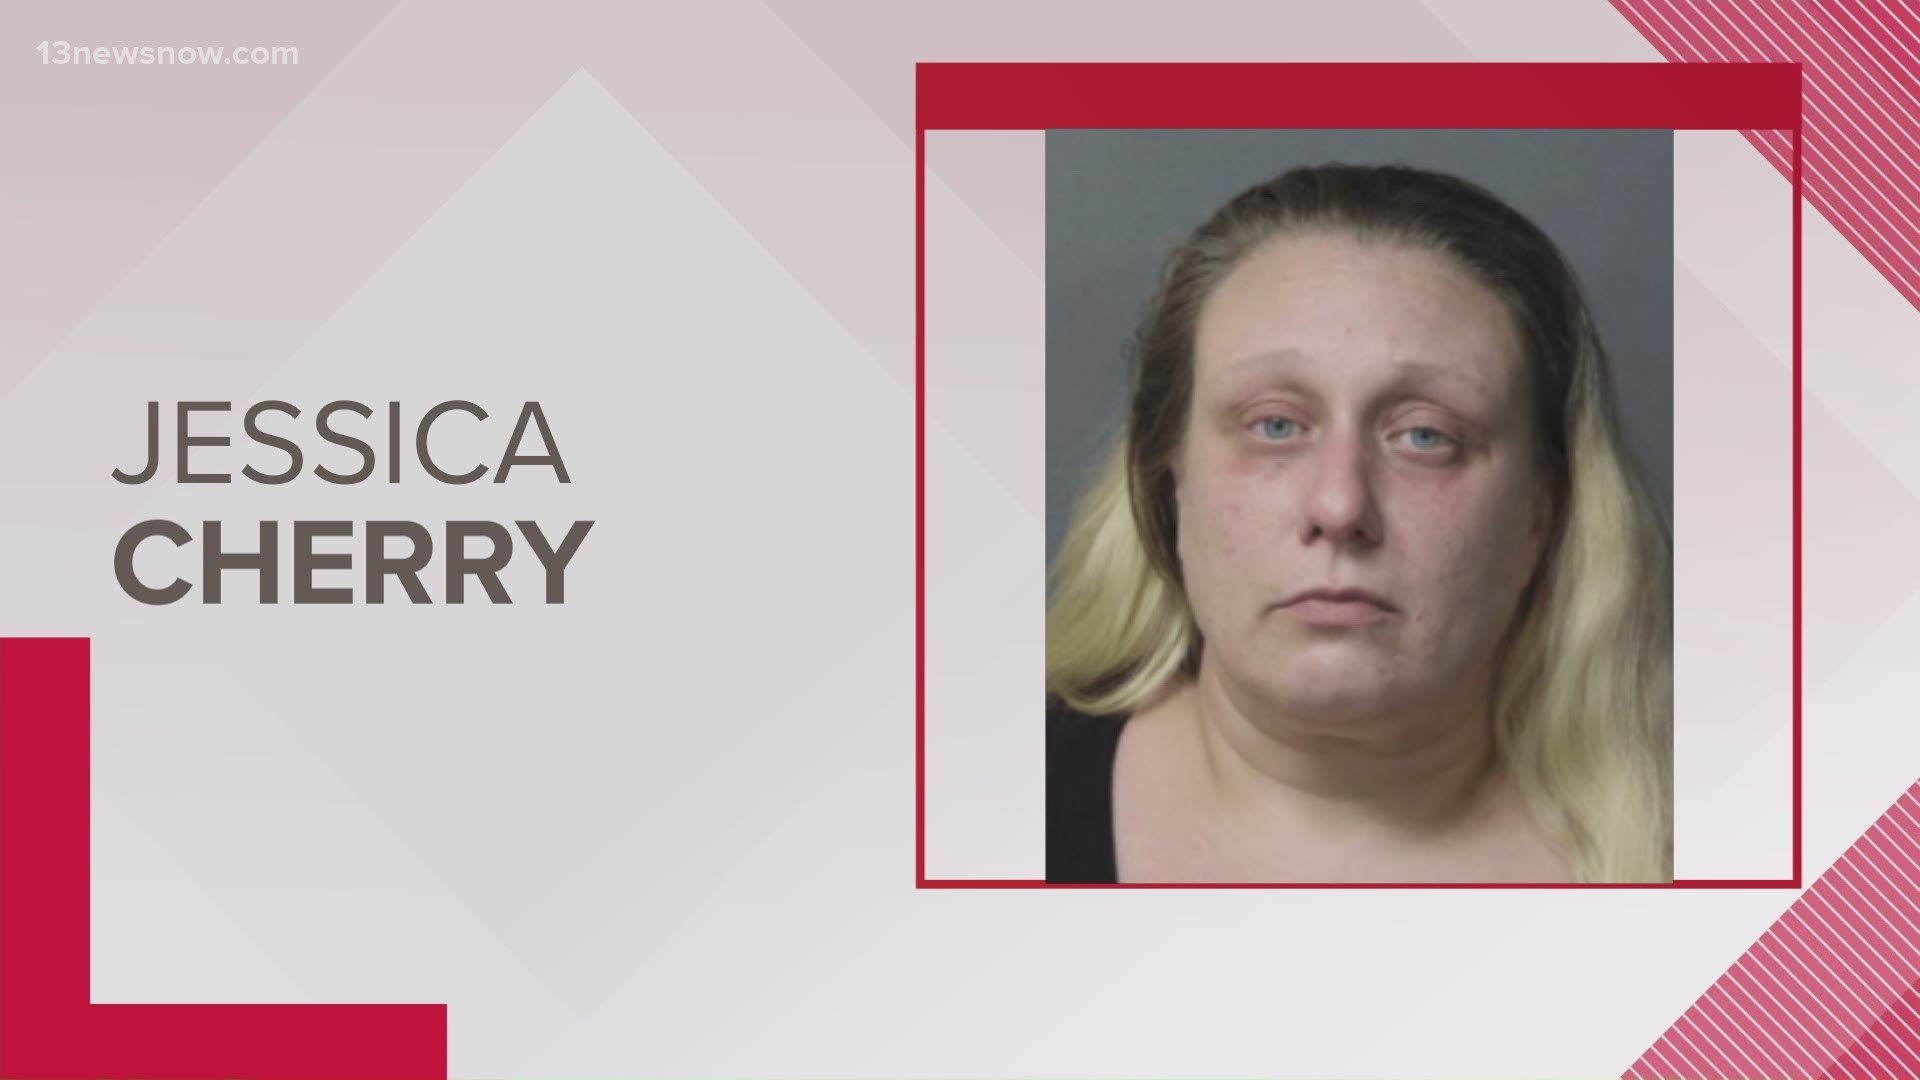 Jessica Cherry is charged with attempted malicious wounding, abuse and neglect of a child and child endangerment. This isn't related to the death of a two-year-old.